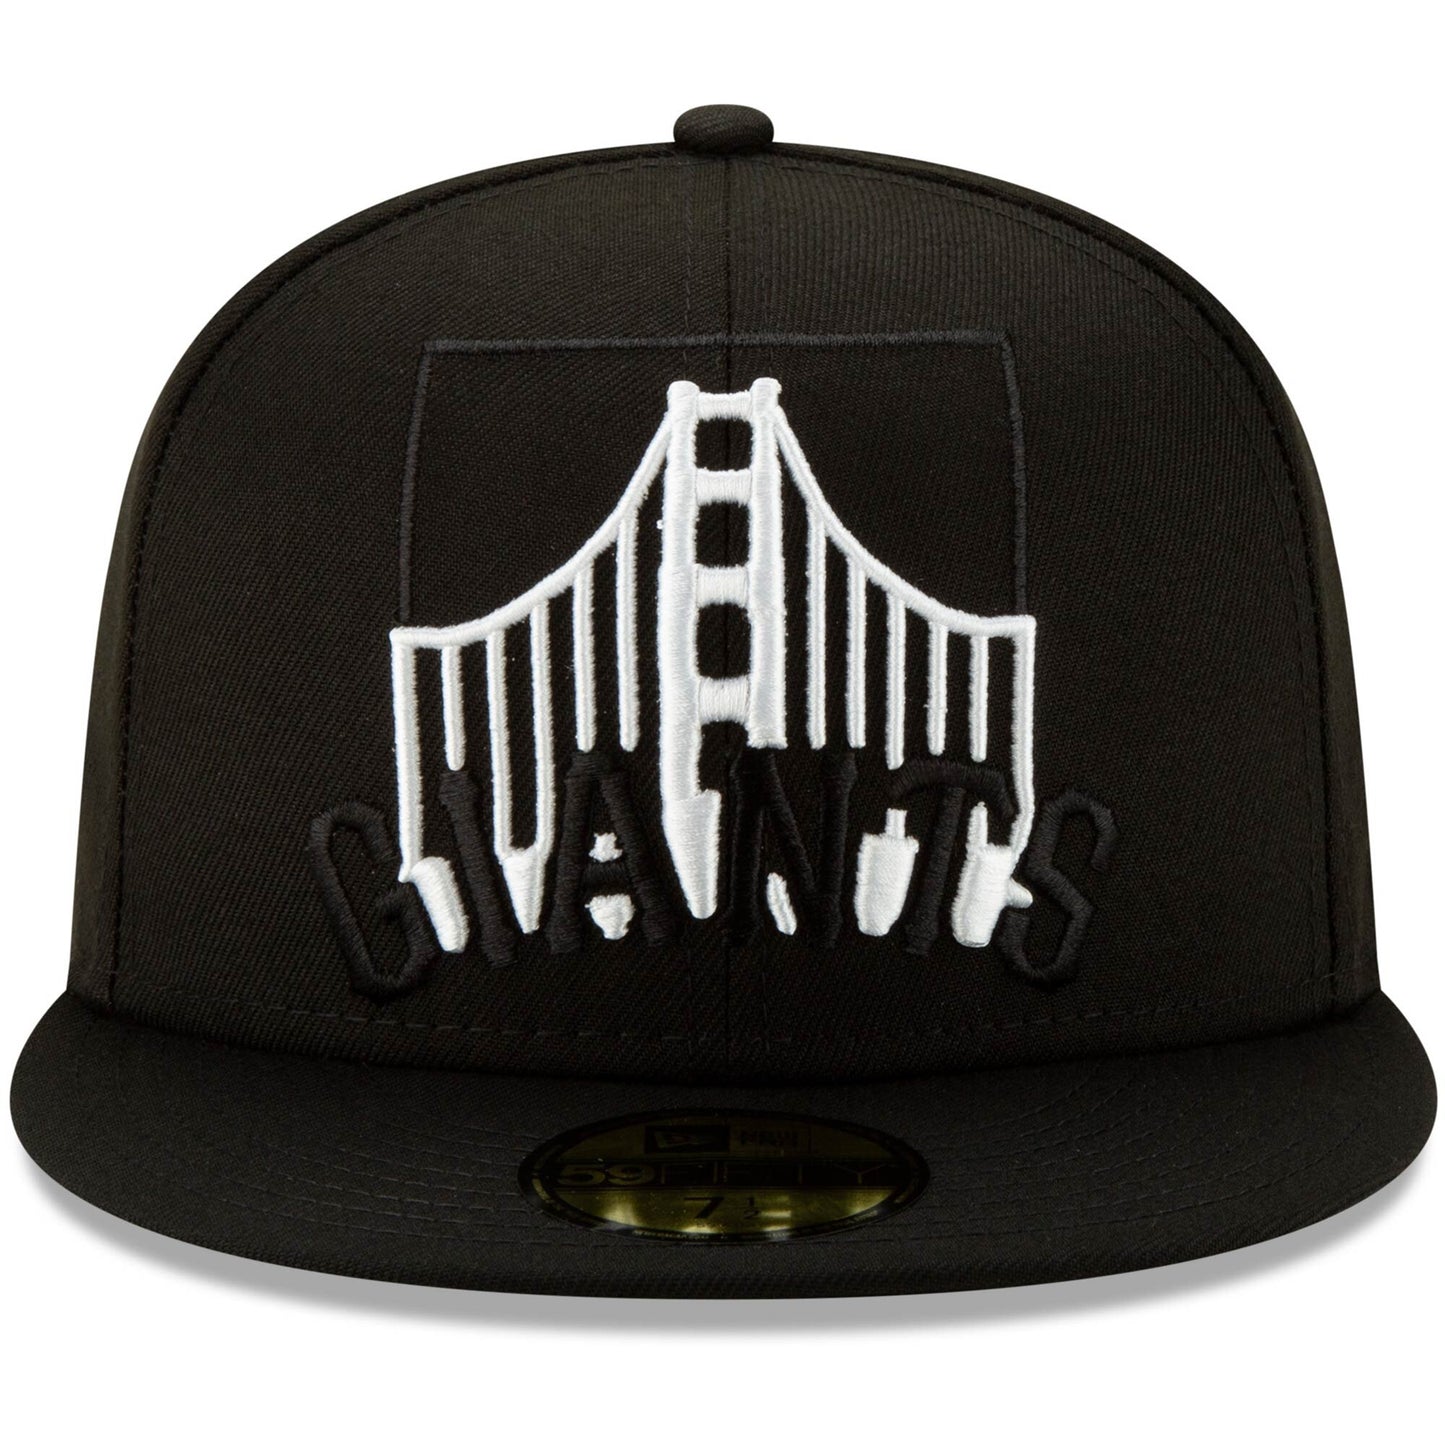 SAN FRANCISCO GIANTS LOGO ELEMENTS 5950 FITTED BLACK/WHITE